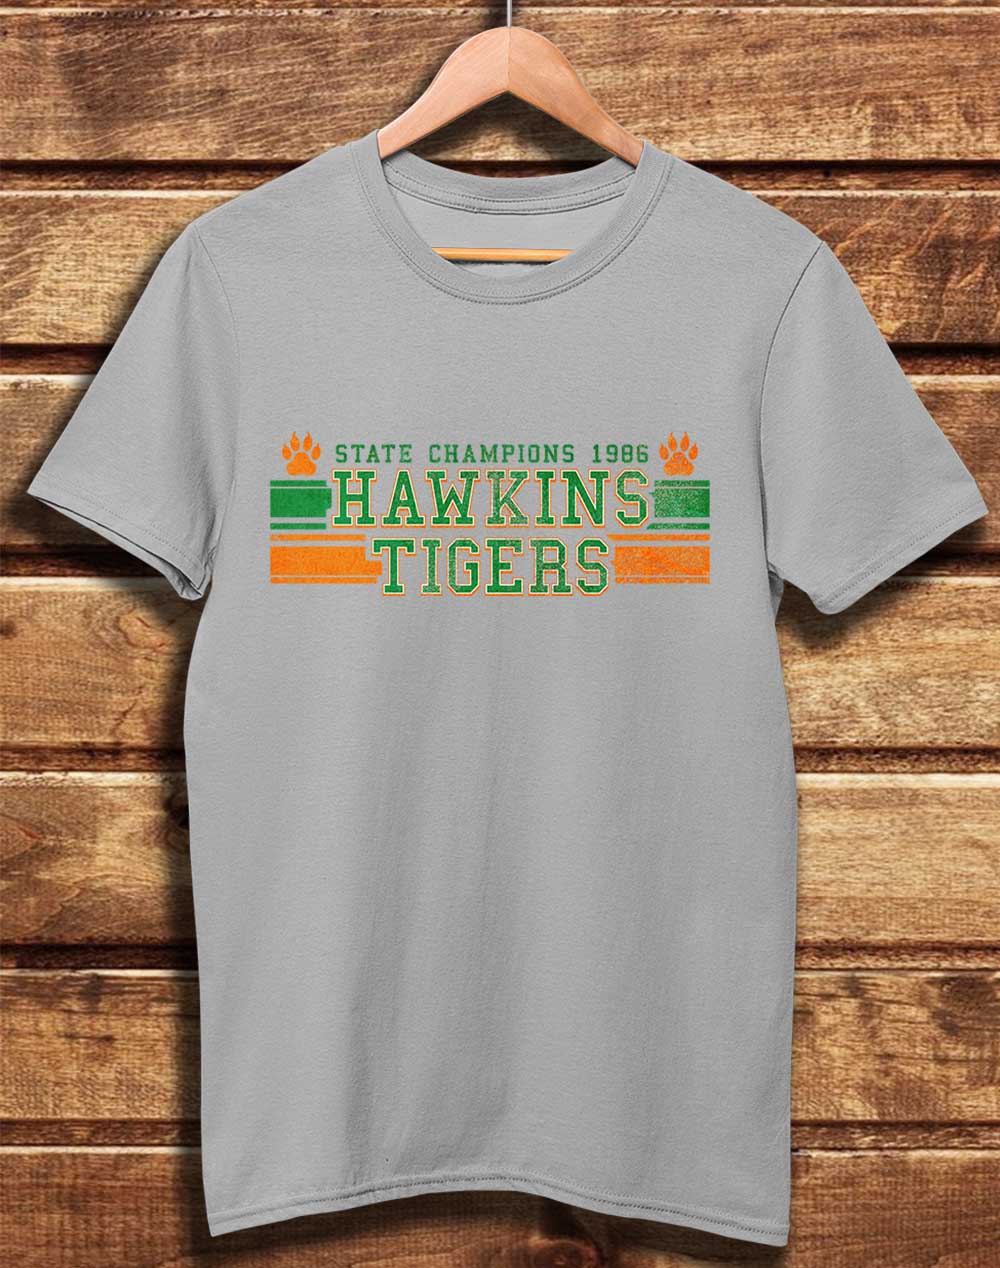 Light Grey - DELUXE Hawkins Tigers State Champs 1986 Organic Cotton T-Shirt